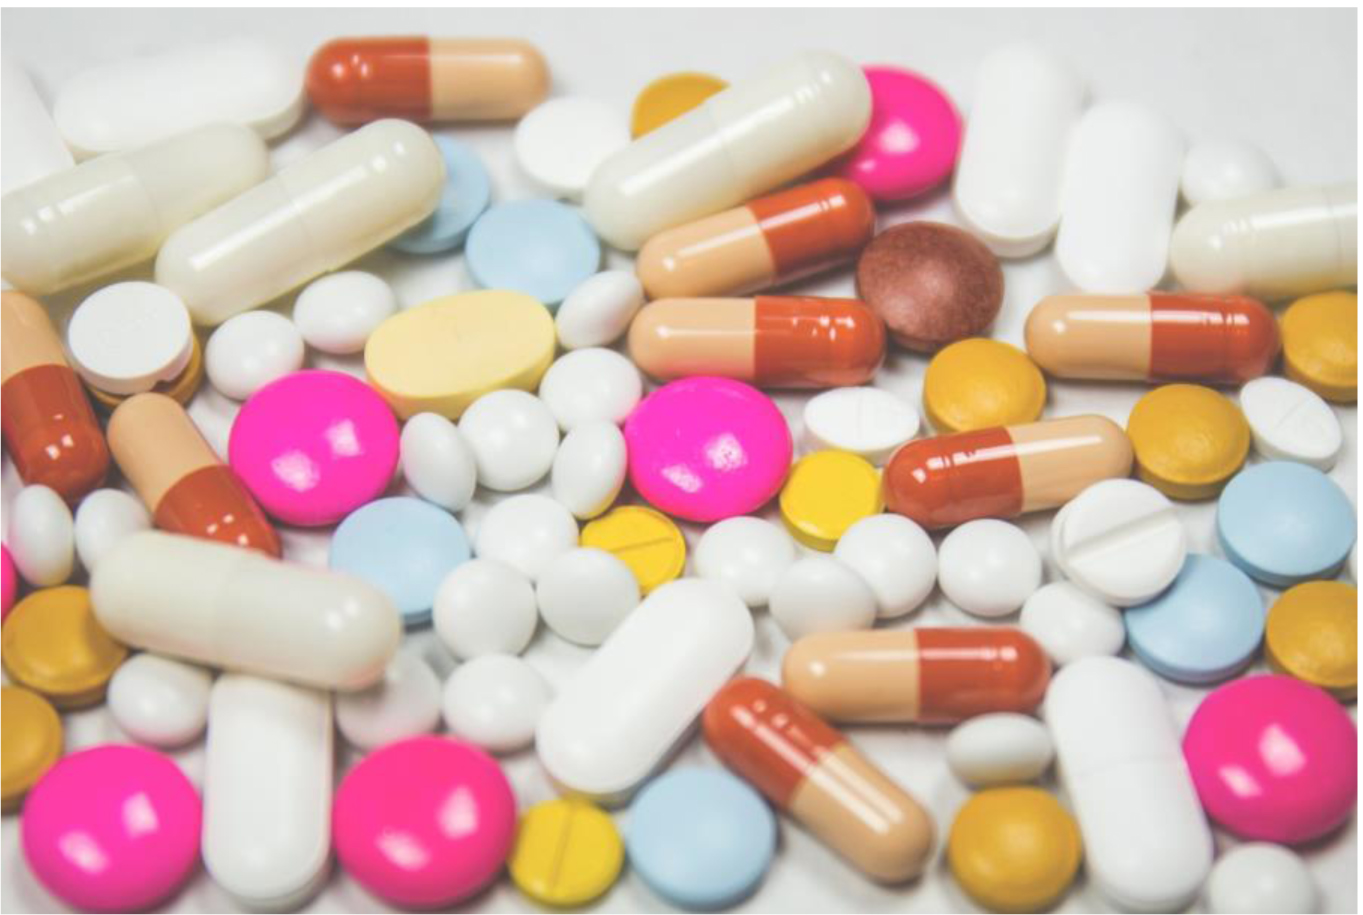 A pile of pills and capsules illustrating the nocebo effect.